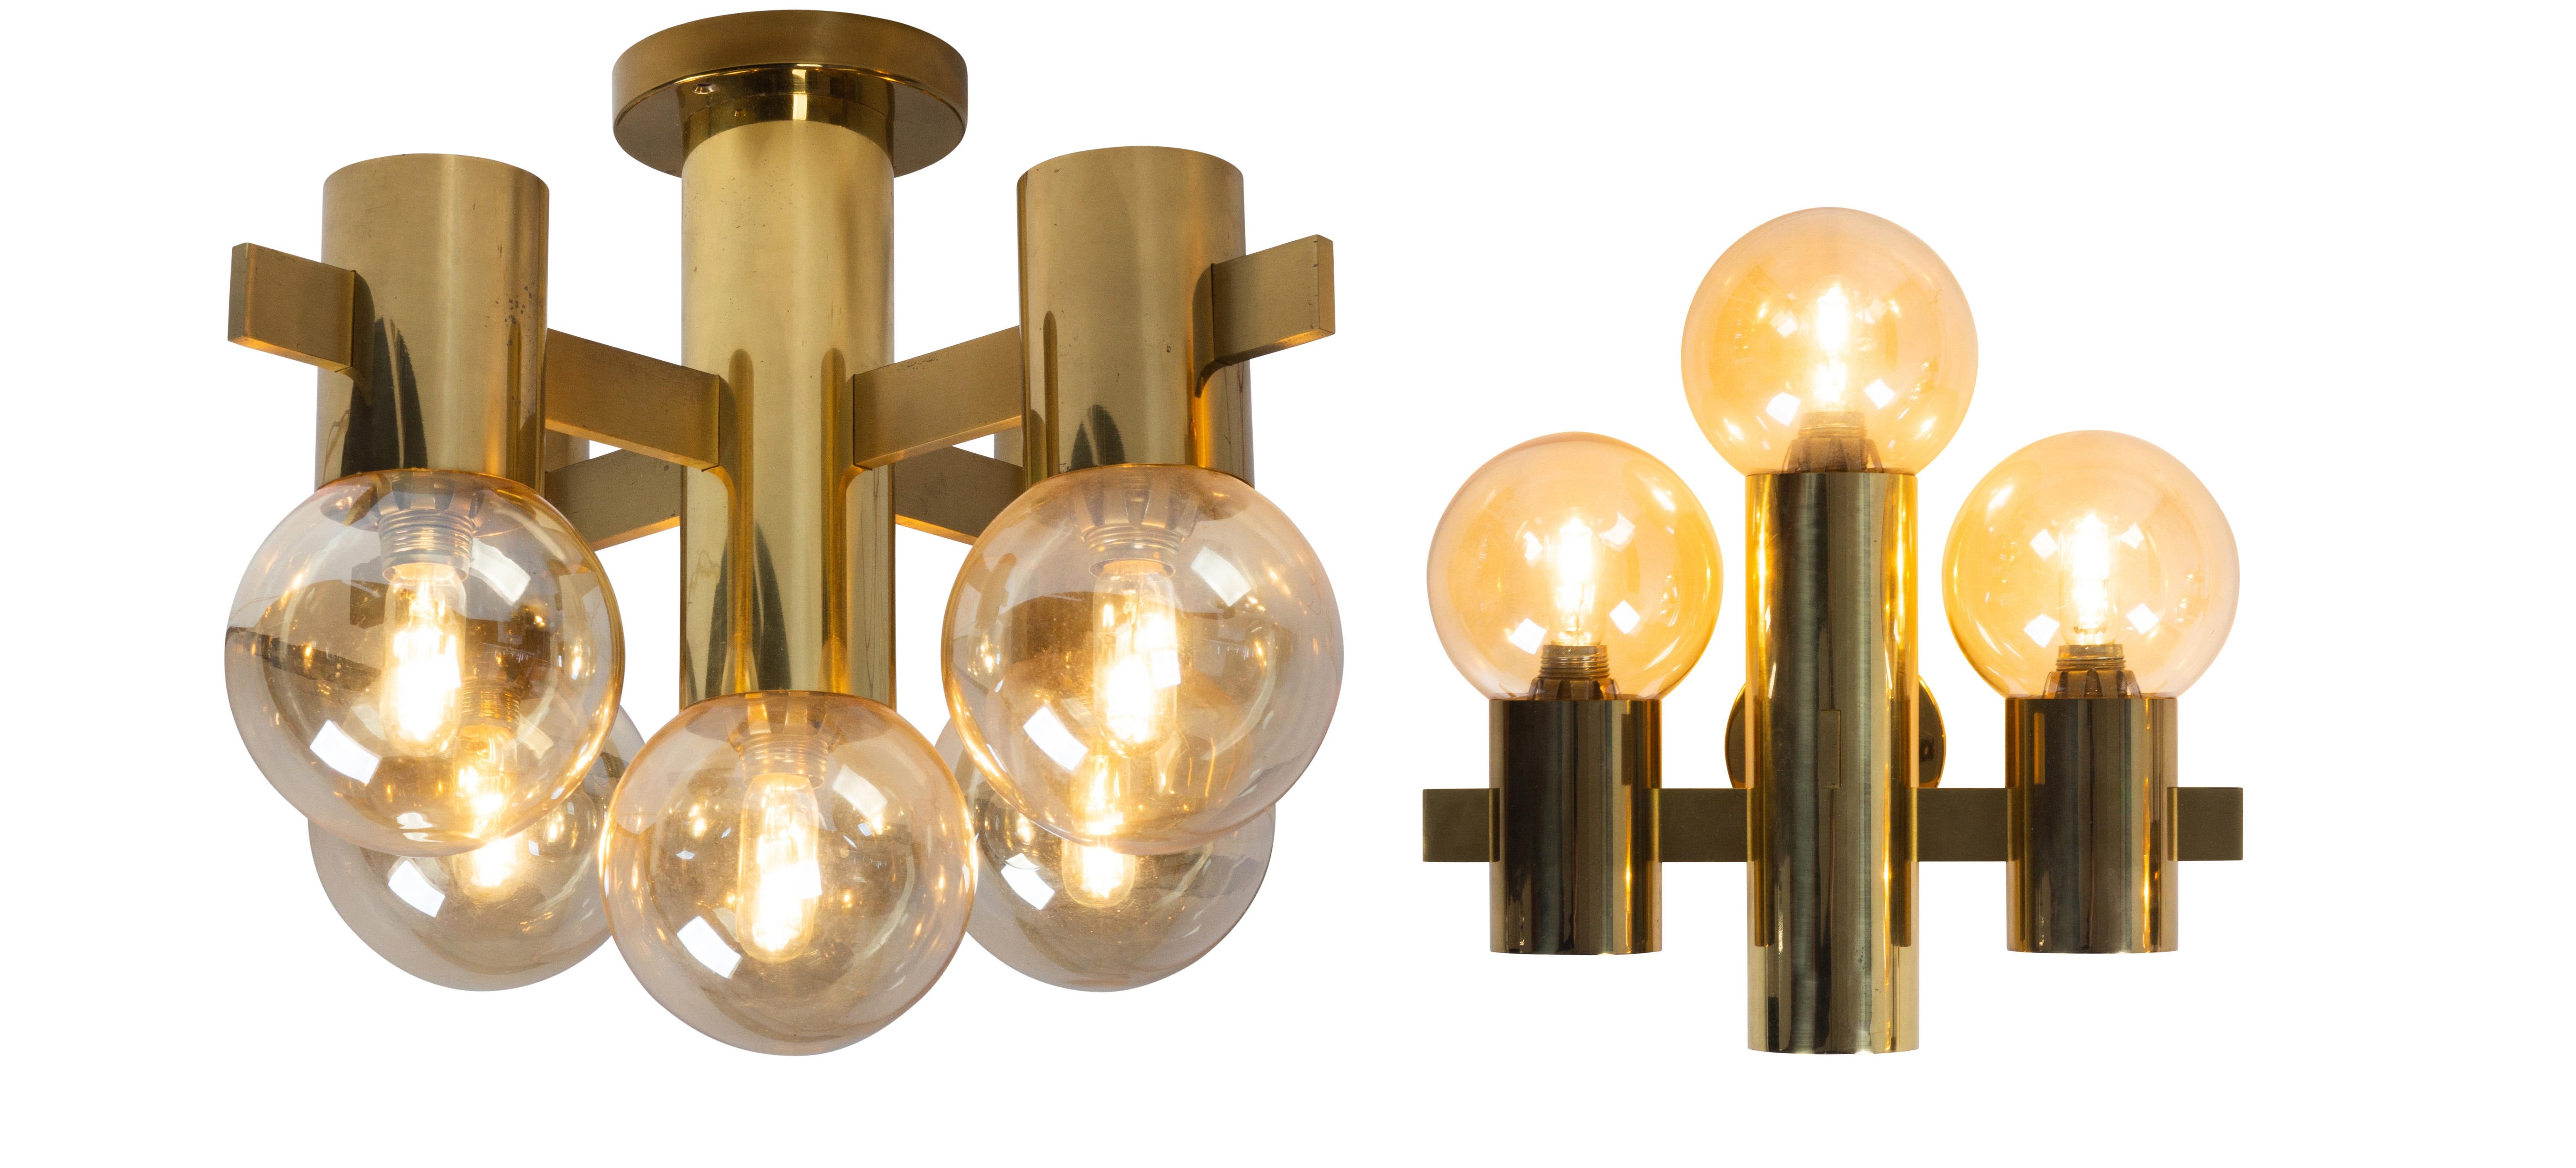 Hans Agne Jakobsson for teka, brass wall and ceiling light. Beautiful light fixtures with smoke glass.